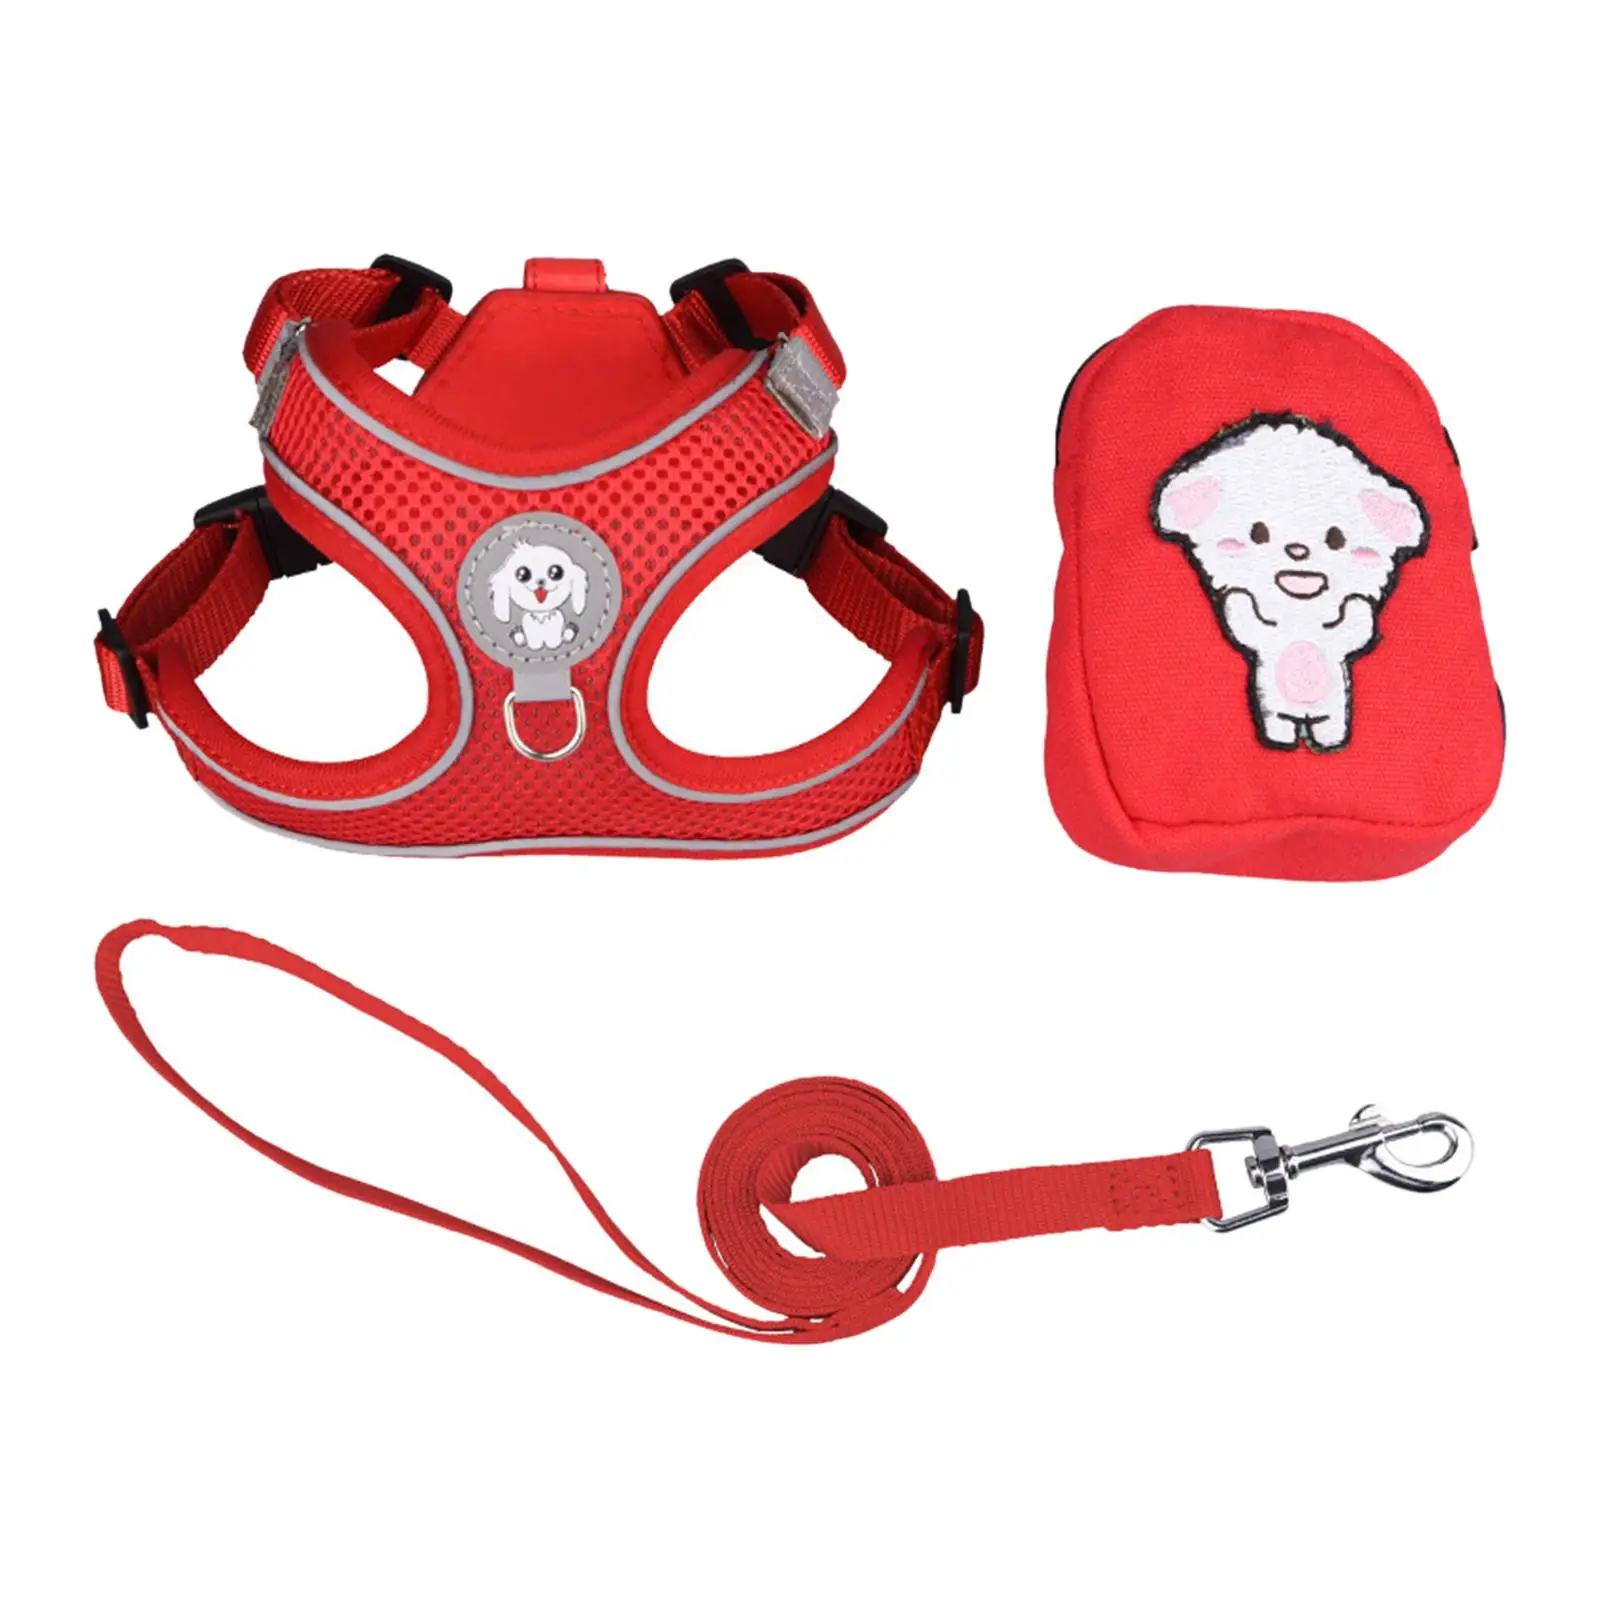 Soft Dogs Harness and Leash Set Comfortable for Running Training Walking